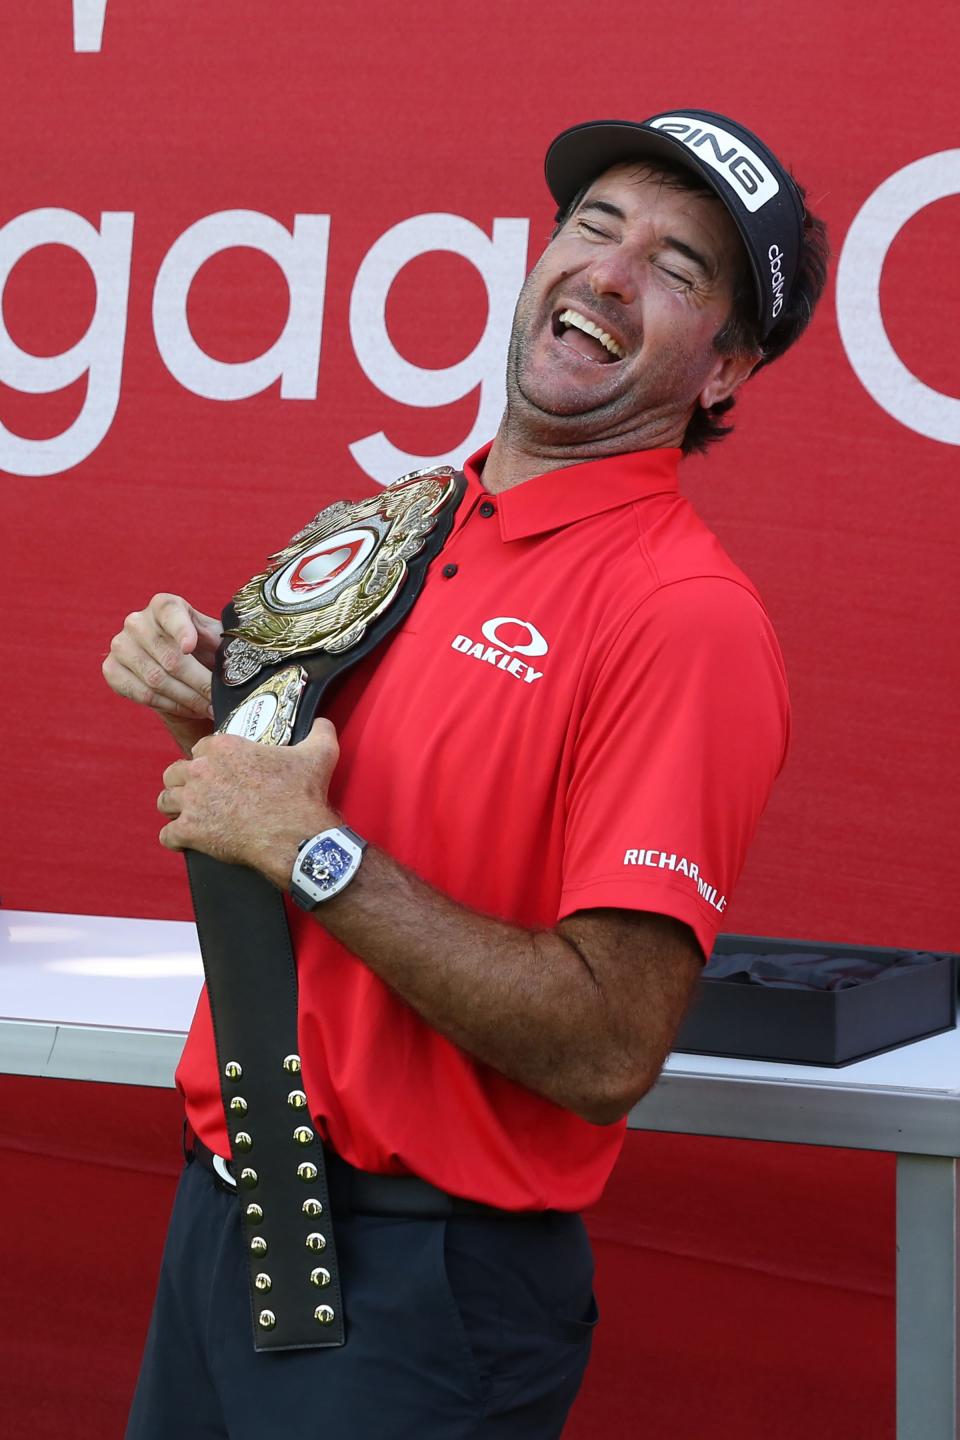 Jul 1, 2020; Detroit, Michigan, USA; Bubba Watson poses with the champions belt after being a winner of the Rocket Mortgage ClassicÕs ÒChanging the CourseÓ charity golf event, 12-time PGA TOUR winner and two-time Masters champion Bubba Watson and Harold Varner III versus former World No. 1 Jason Day and Wesley Bryan nine-hole exhibition at Detroit Golf Club. Mandatory Credit: Brian Spurlock-USA TODAY Sports